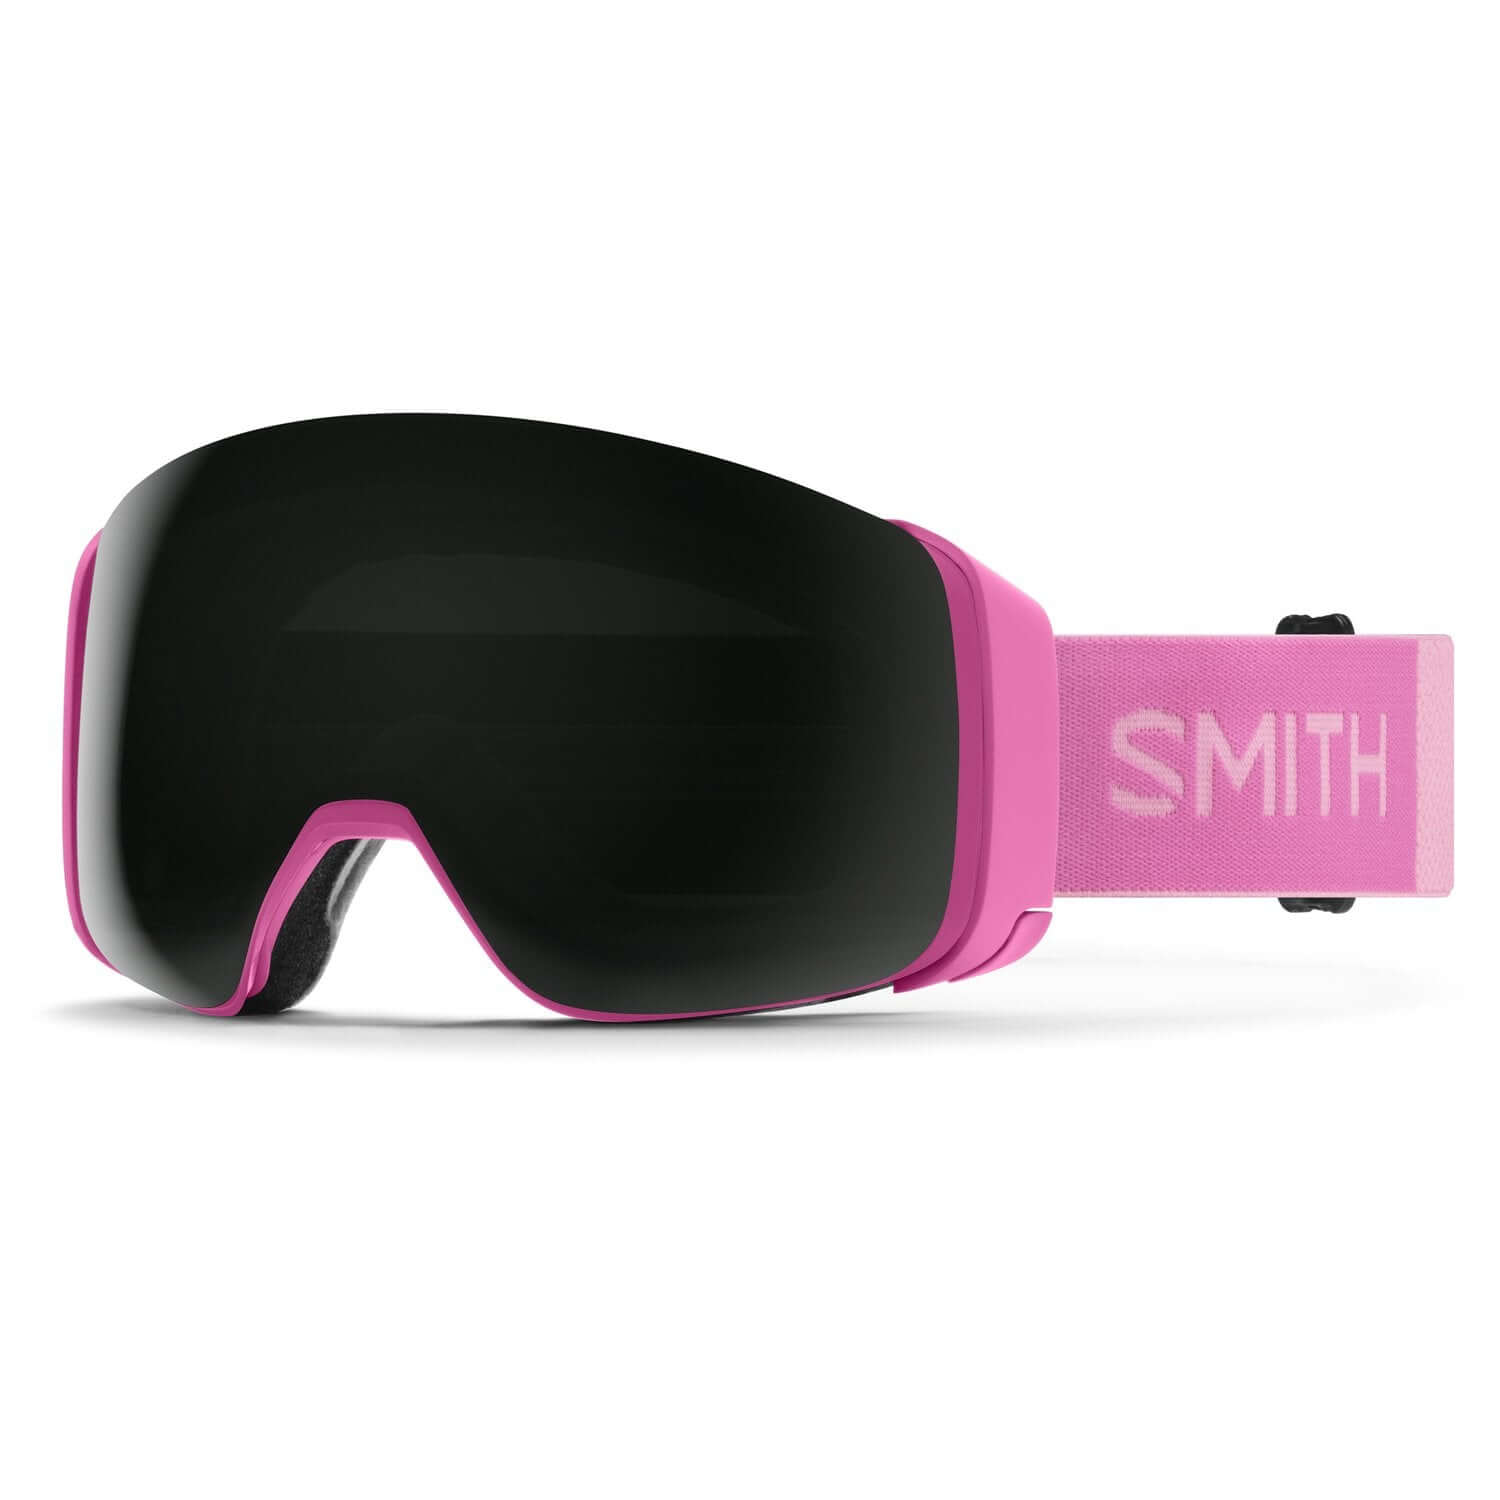 Smith 4D MAG Asia Fit Snow Goggle Default Title - Smith Snow Goggles